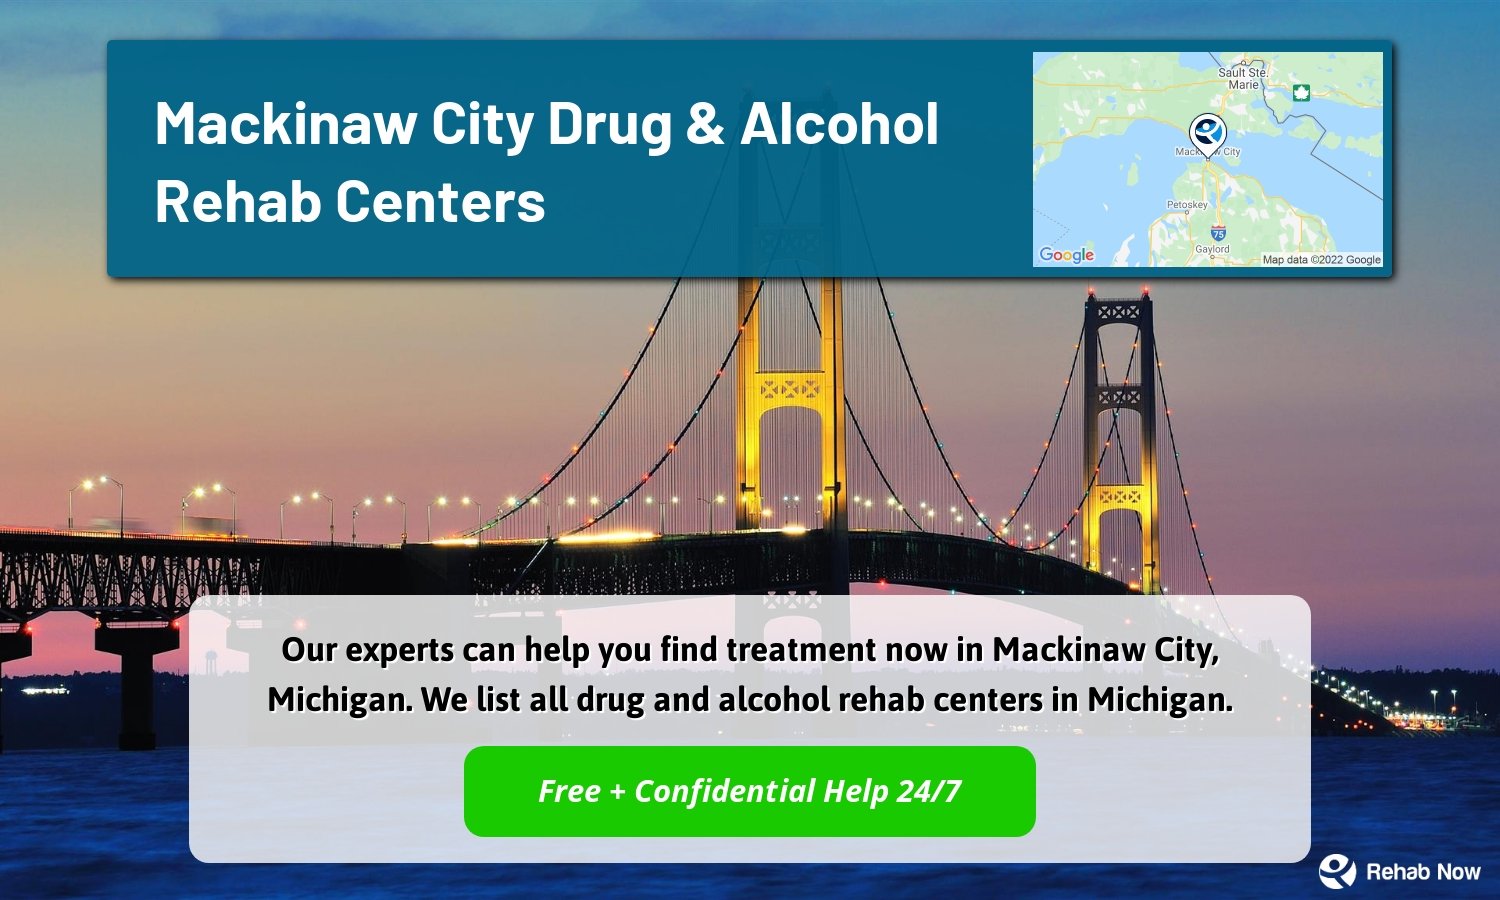 Our experts can help you find treatment now in Mackinaw City, Michigan. We list all drug and alcohol rehab centers in Michigan.